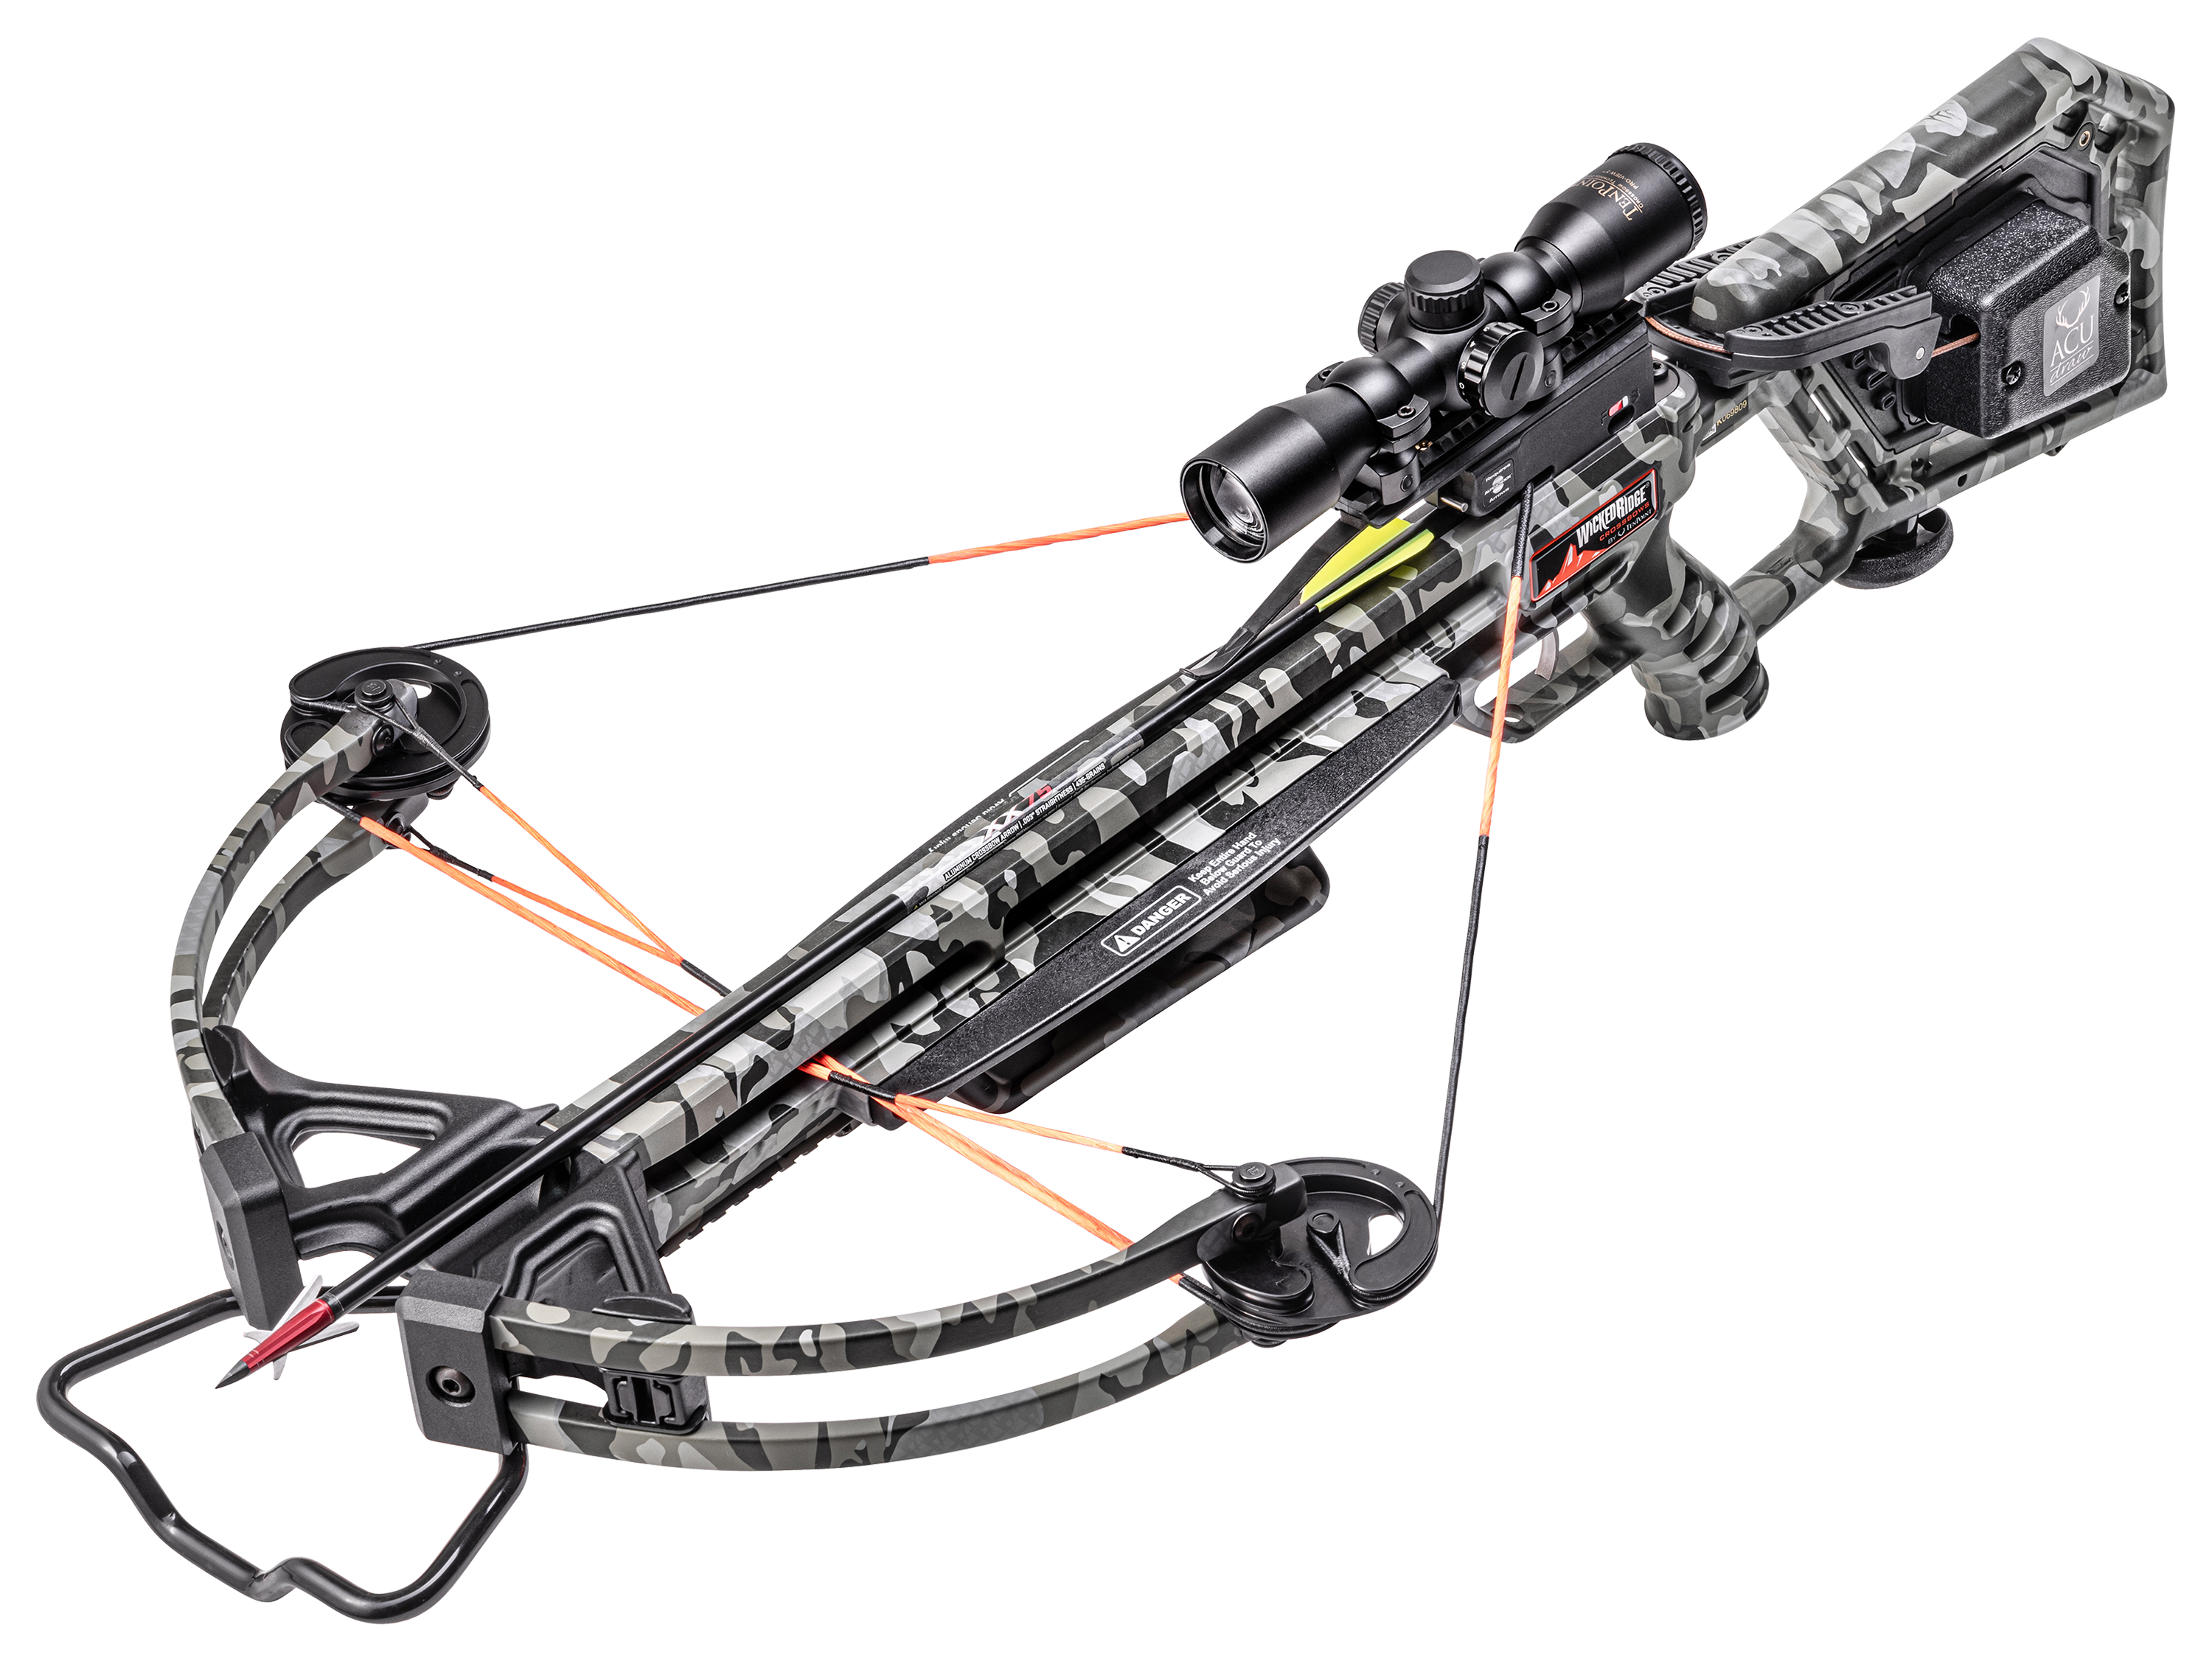 Wicked Ridge Invader 400 Crossbow Package with ACUdraw